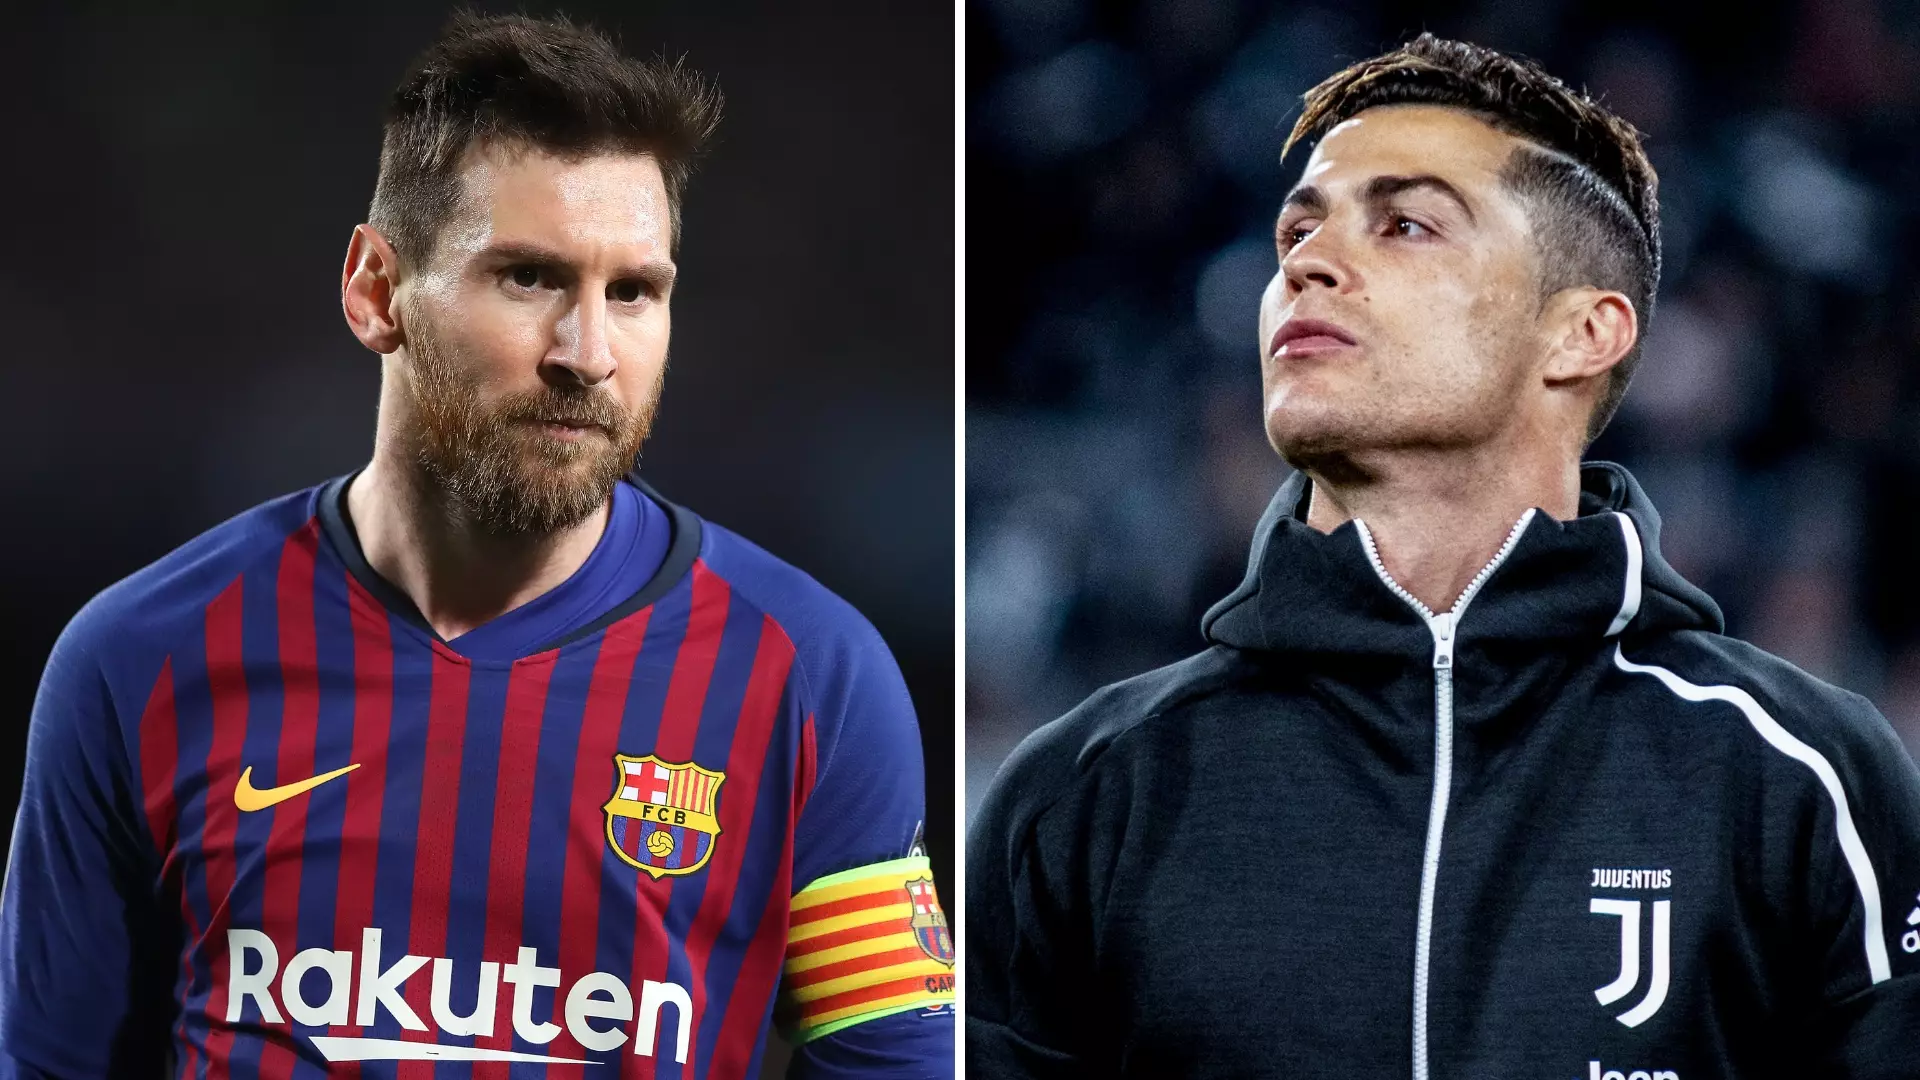 Fan Creates Thread On Ronaldo's Accomplishments And Claims Messi 'Will Never Achieve' Them